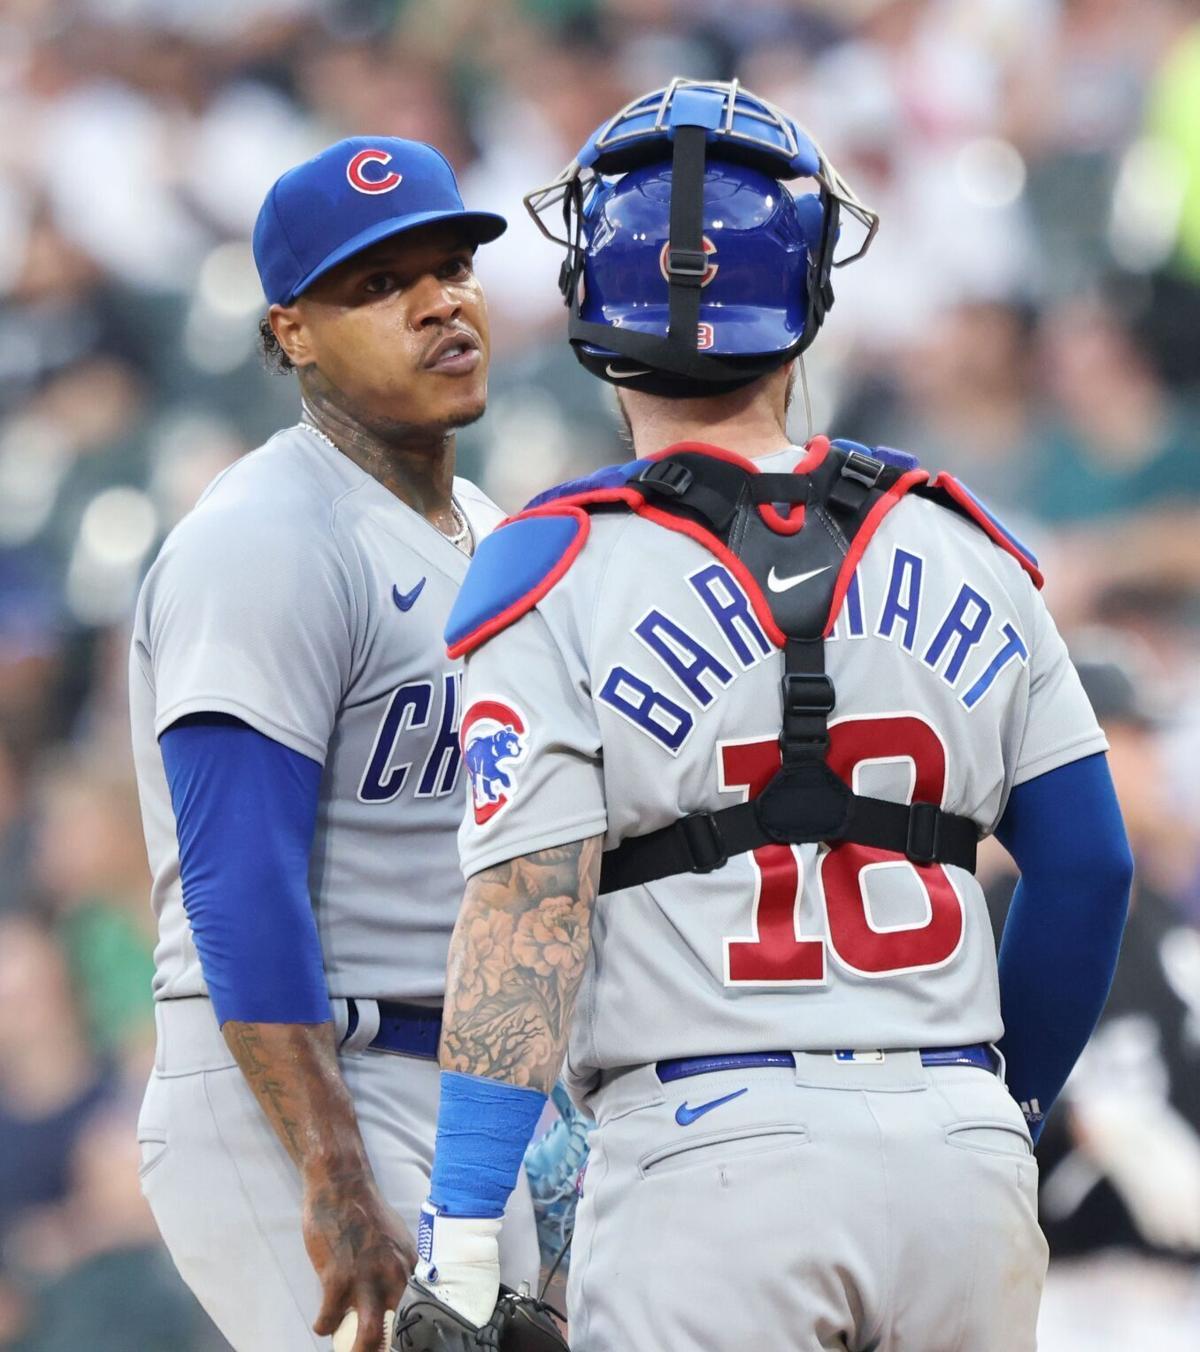 Cubs All-Star shortstop lands on 10-day IL - Marquee Sports Network